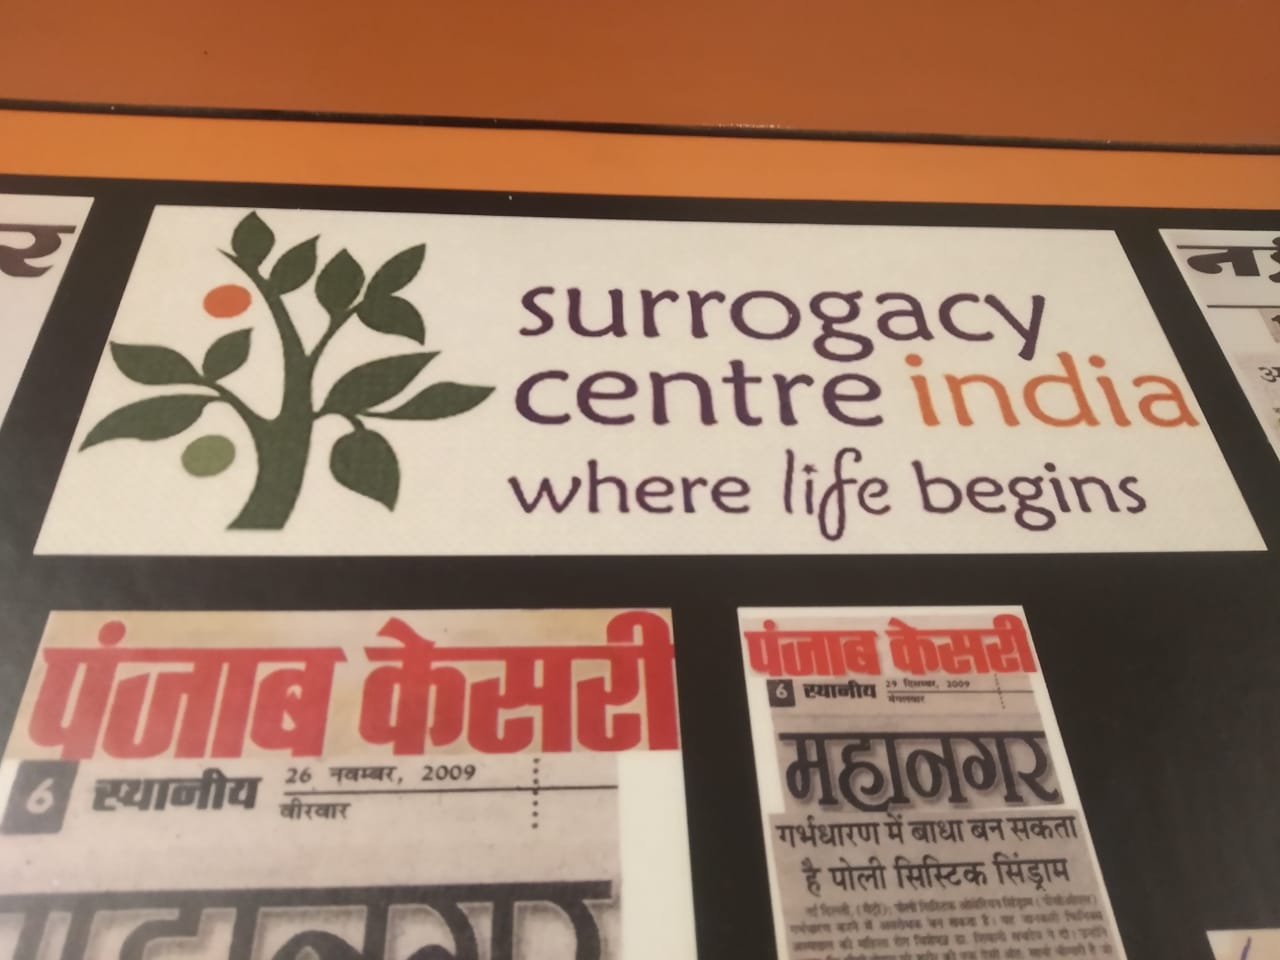 surrogacy centre india - where life begins